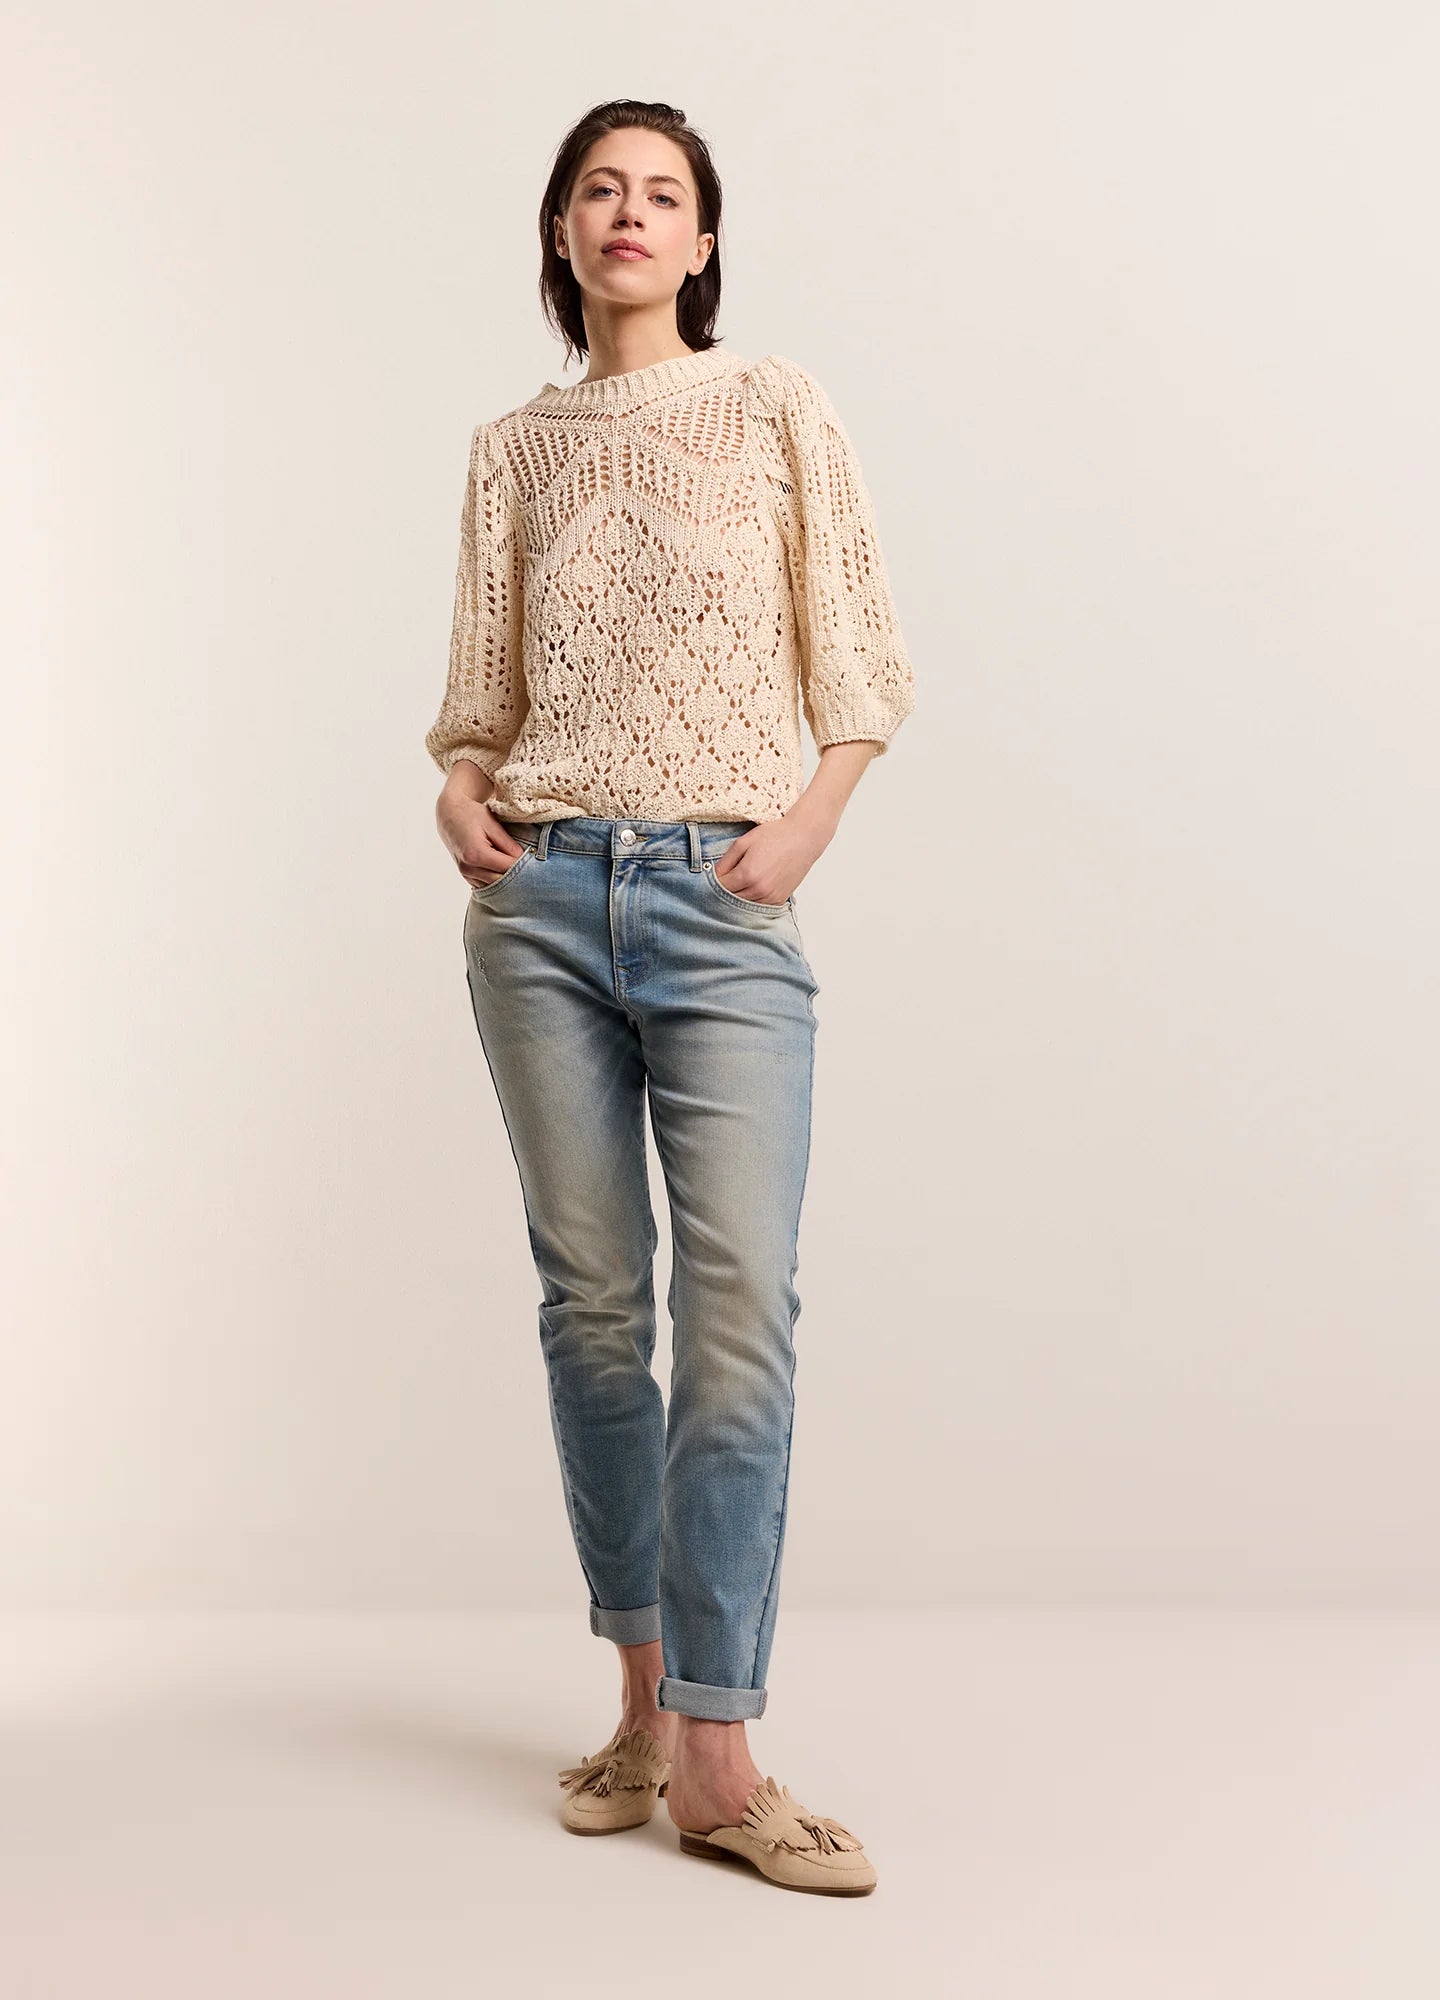 Balloon Sleeve Knitted Jumper in Ivory